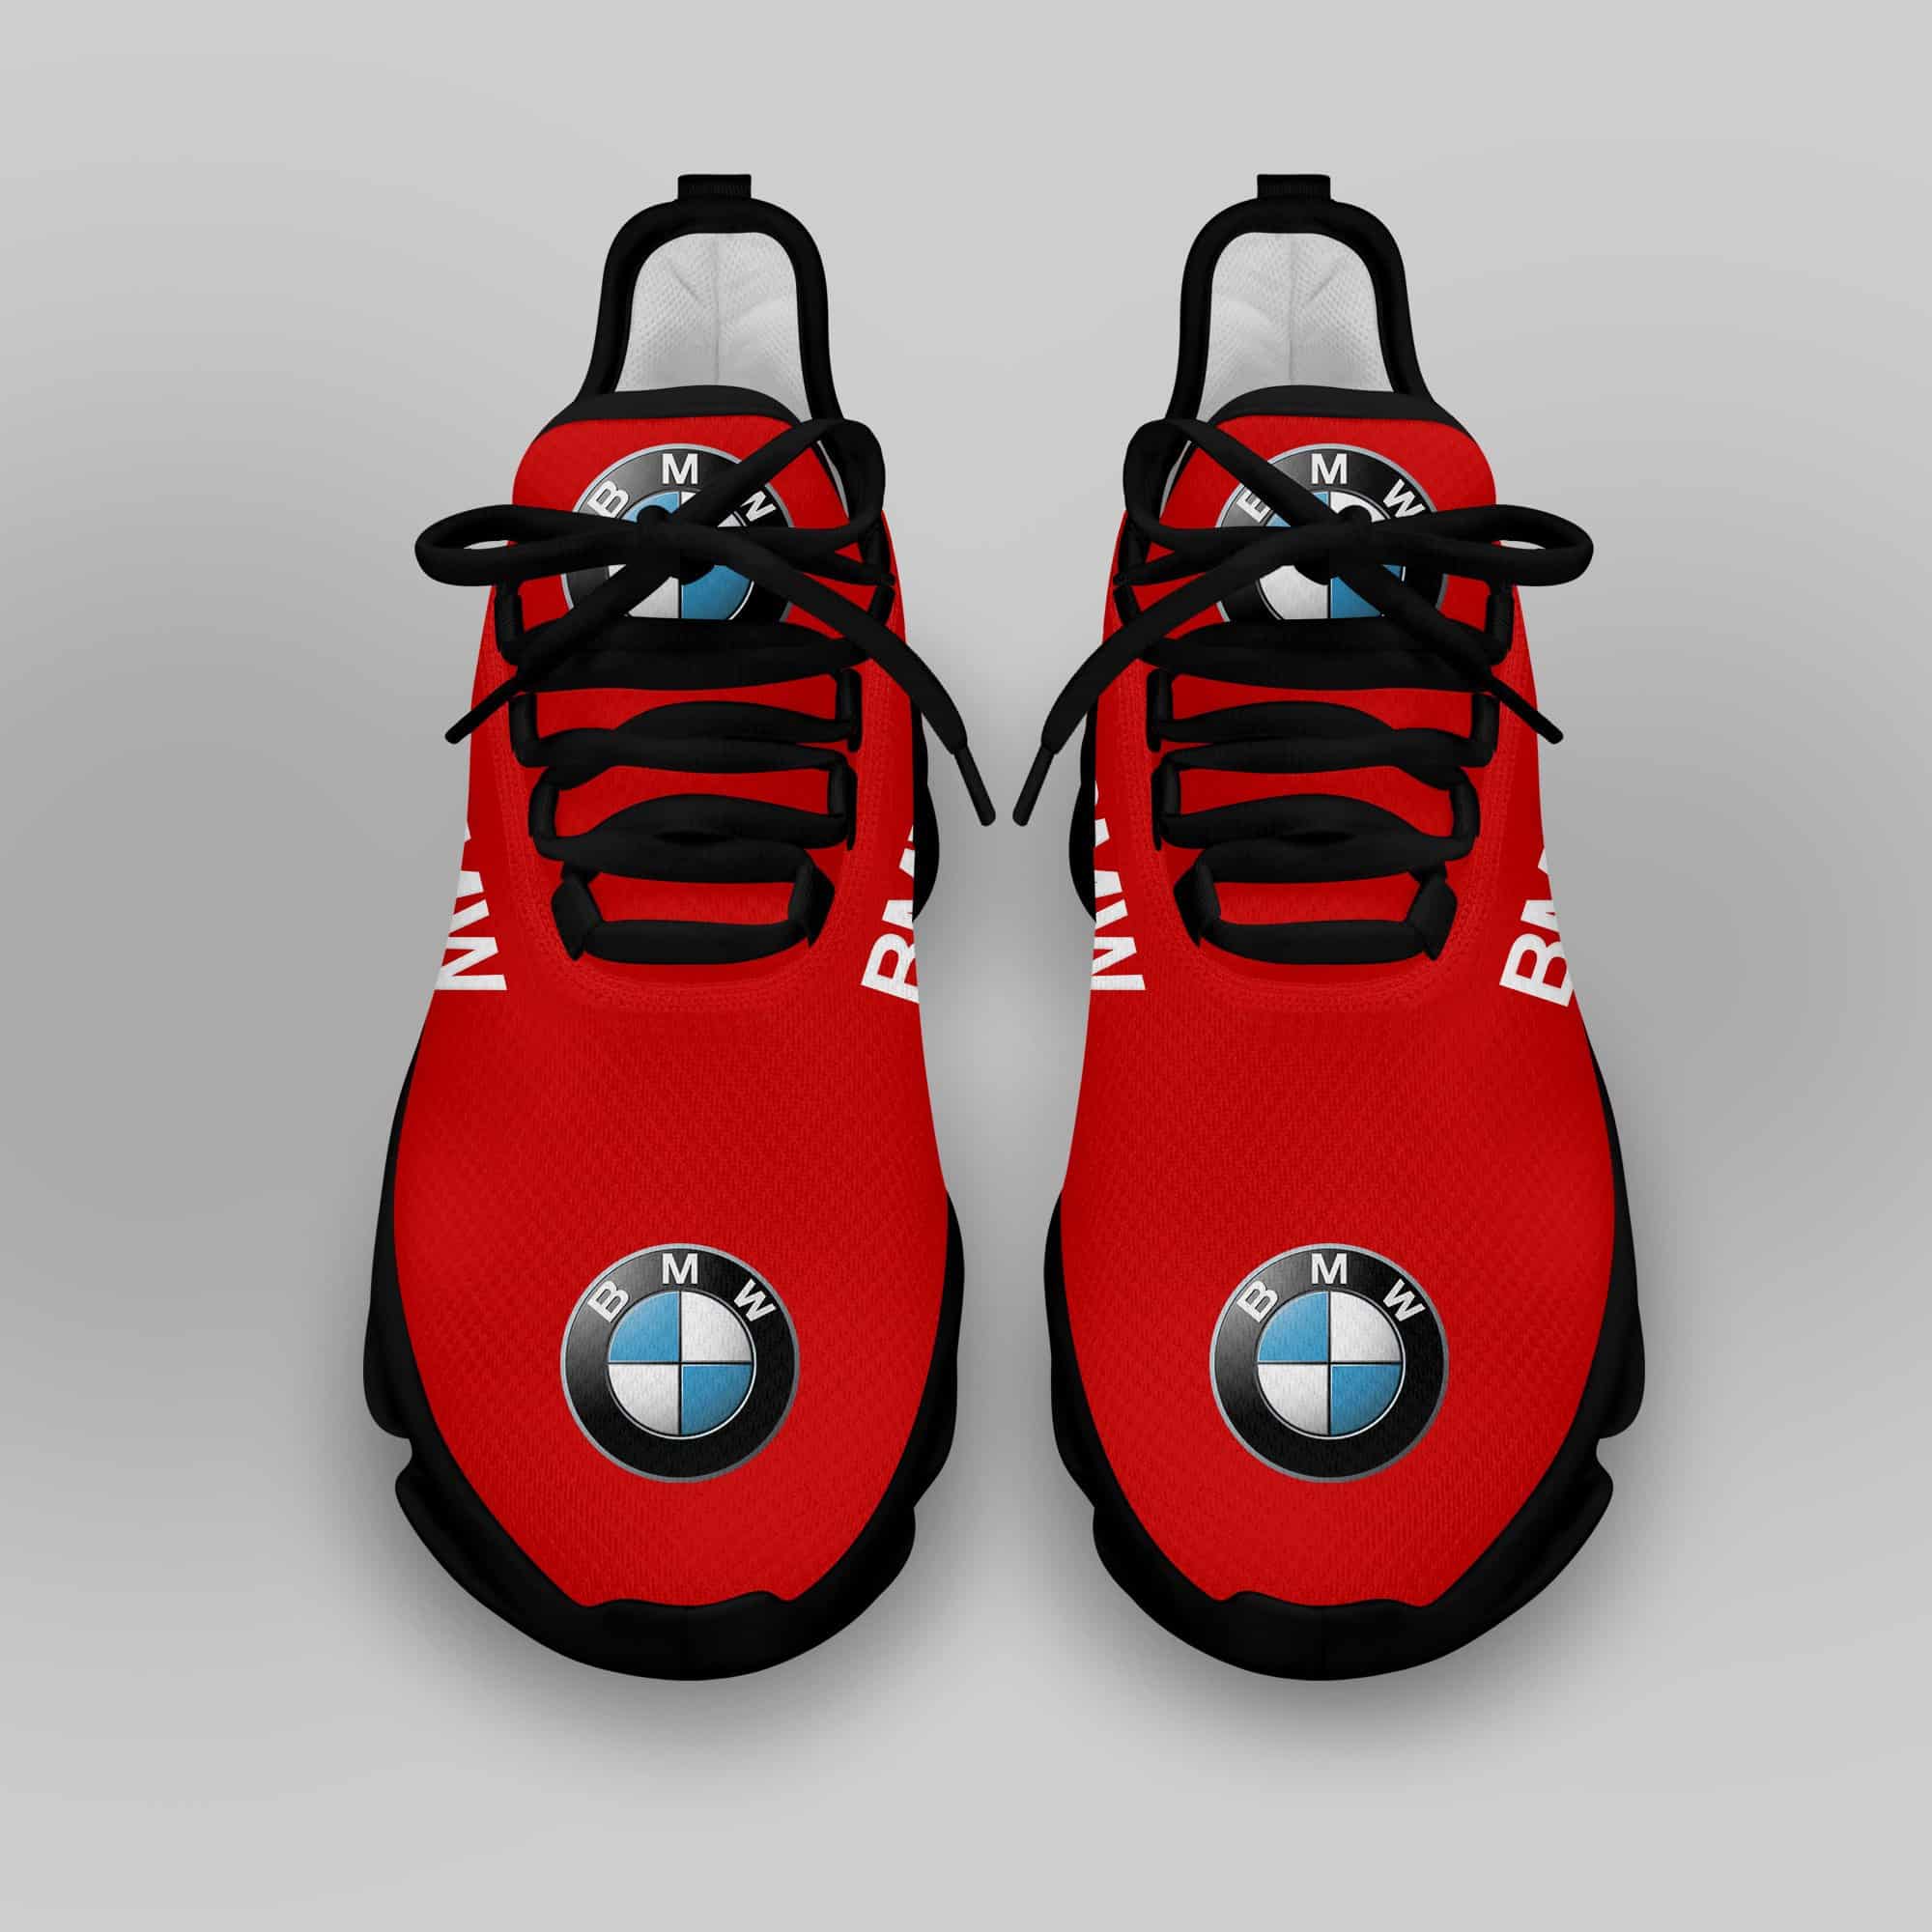 Bmw Running Shoes Max Soul Shoes Sneakers Ver 13 4